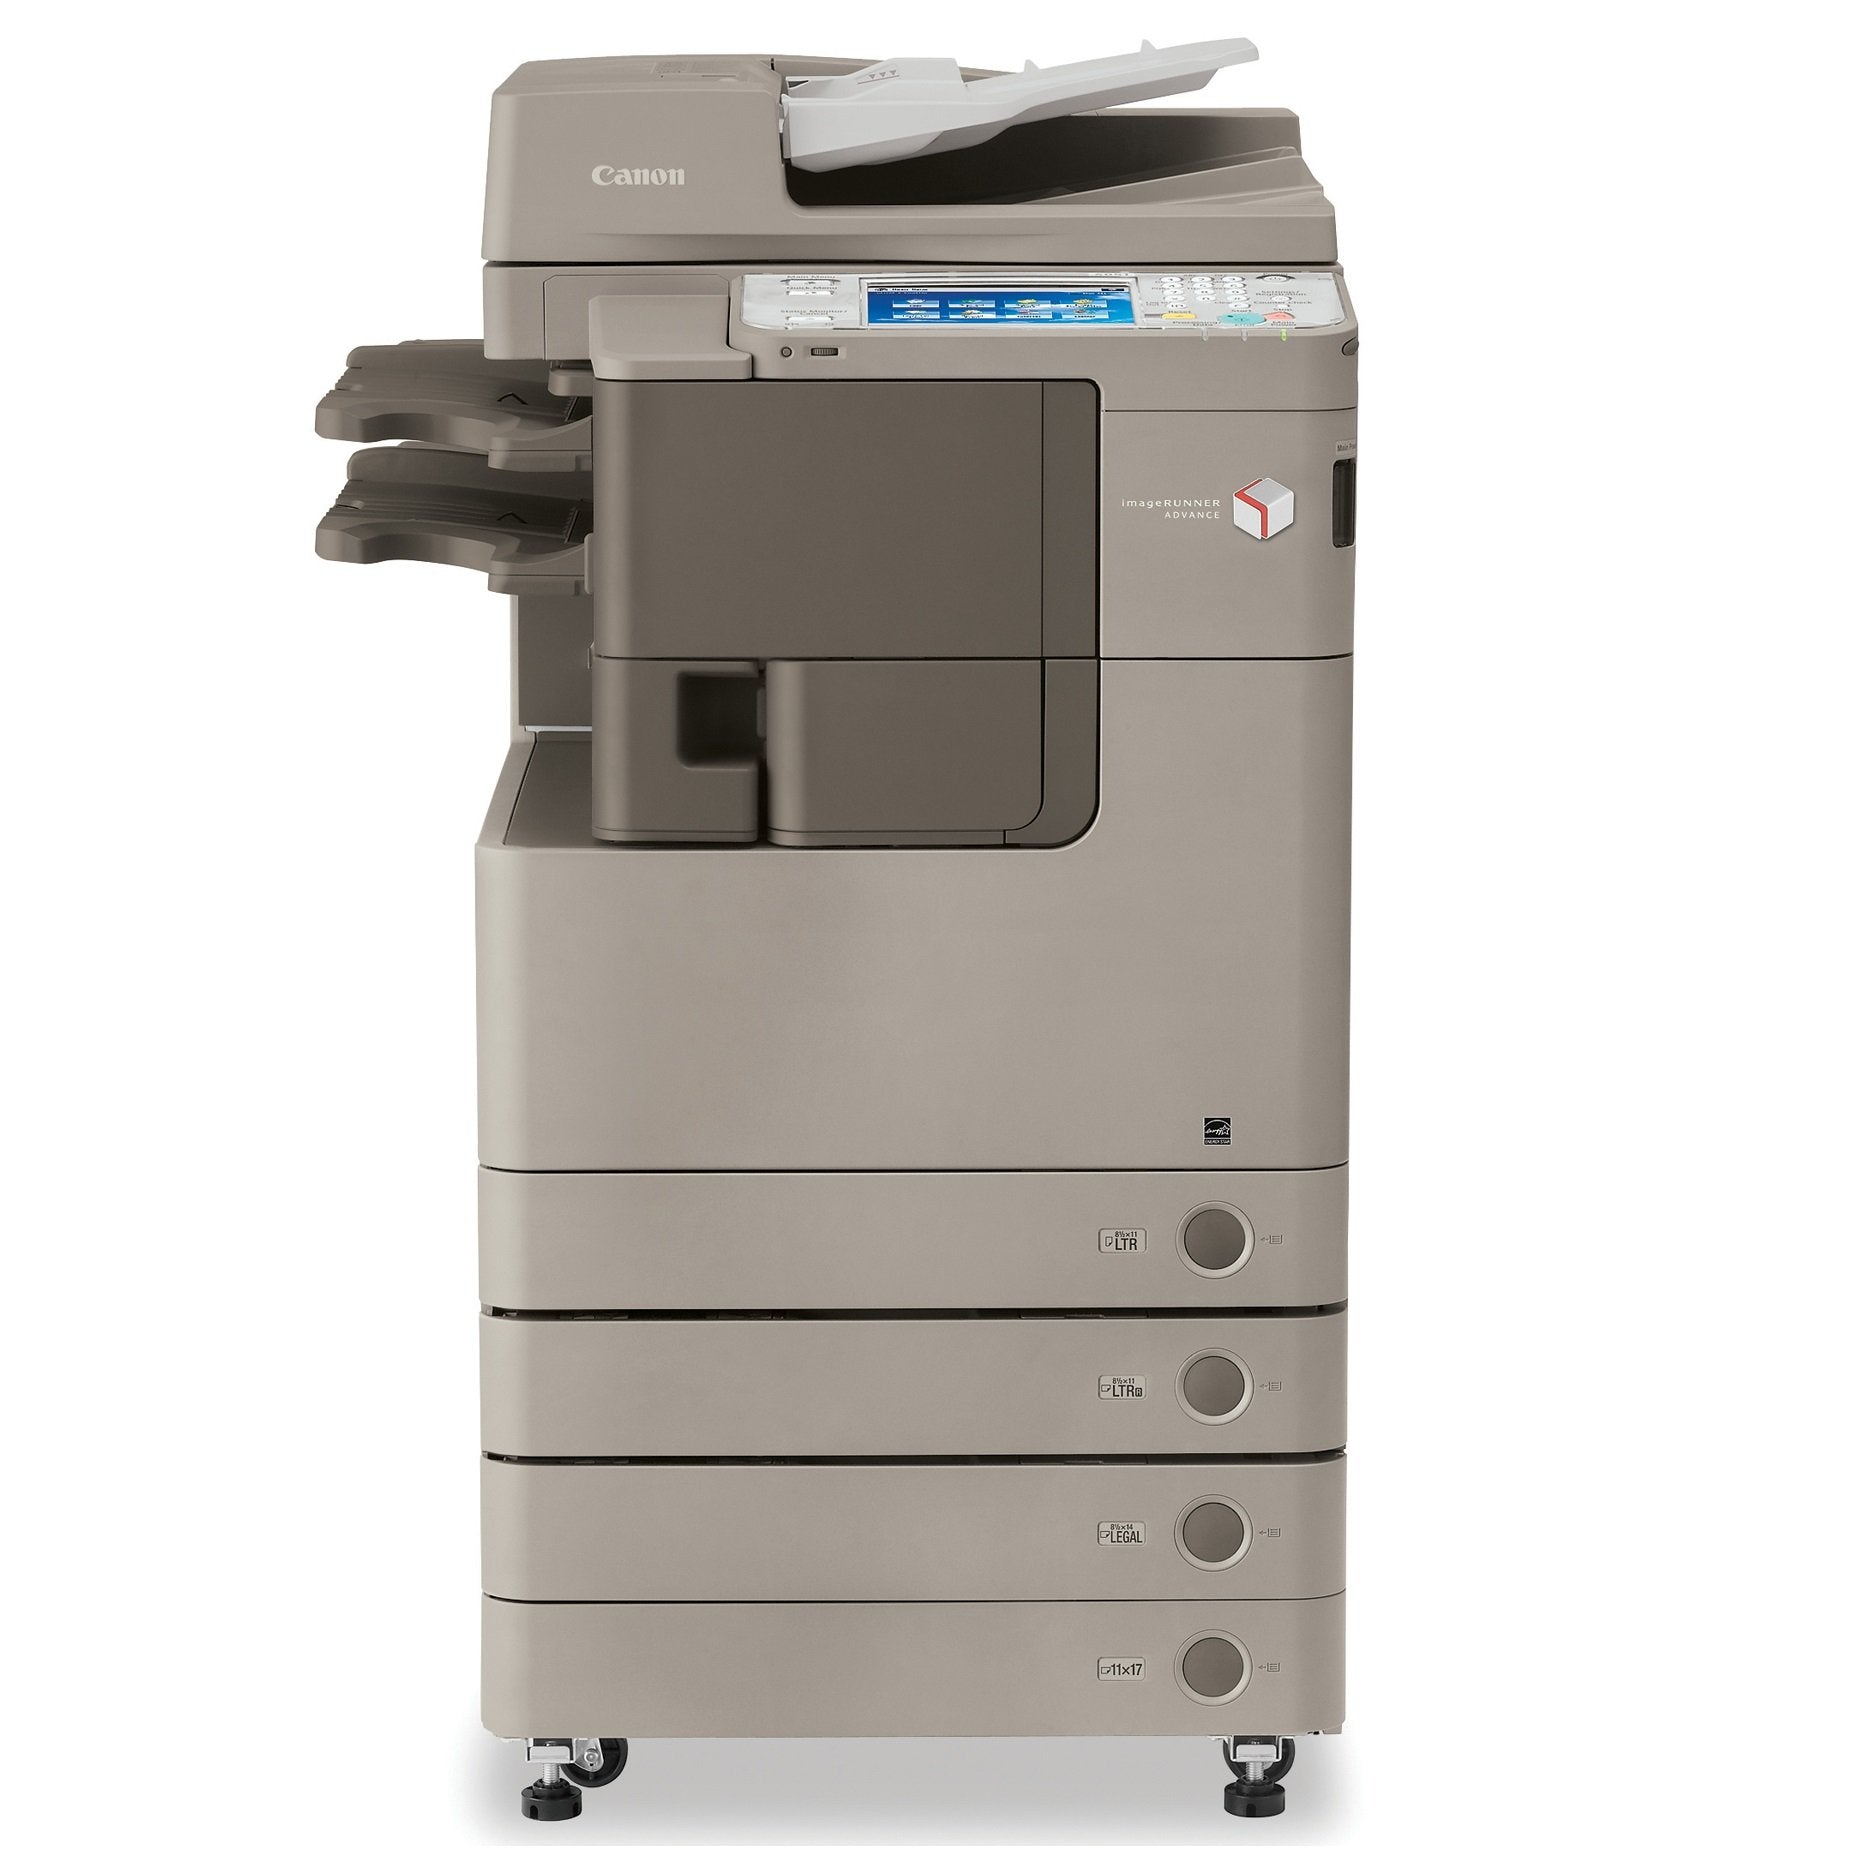 Absolute Toner Canon imageRUNNER ADVANCE 4035 (IRA4035) Monochrome B/W Multifunction Laser Printer, Copier, Scanner with a Finisher, Stapler, 4 Paper Cassettes, LCD, 11x17 Showroom Monochrome Copiers